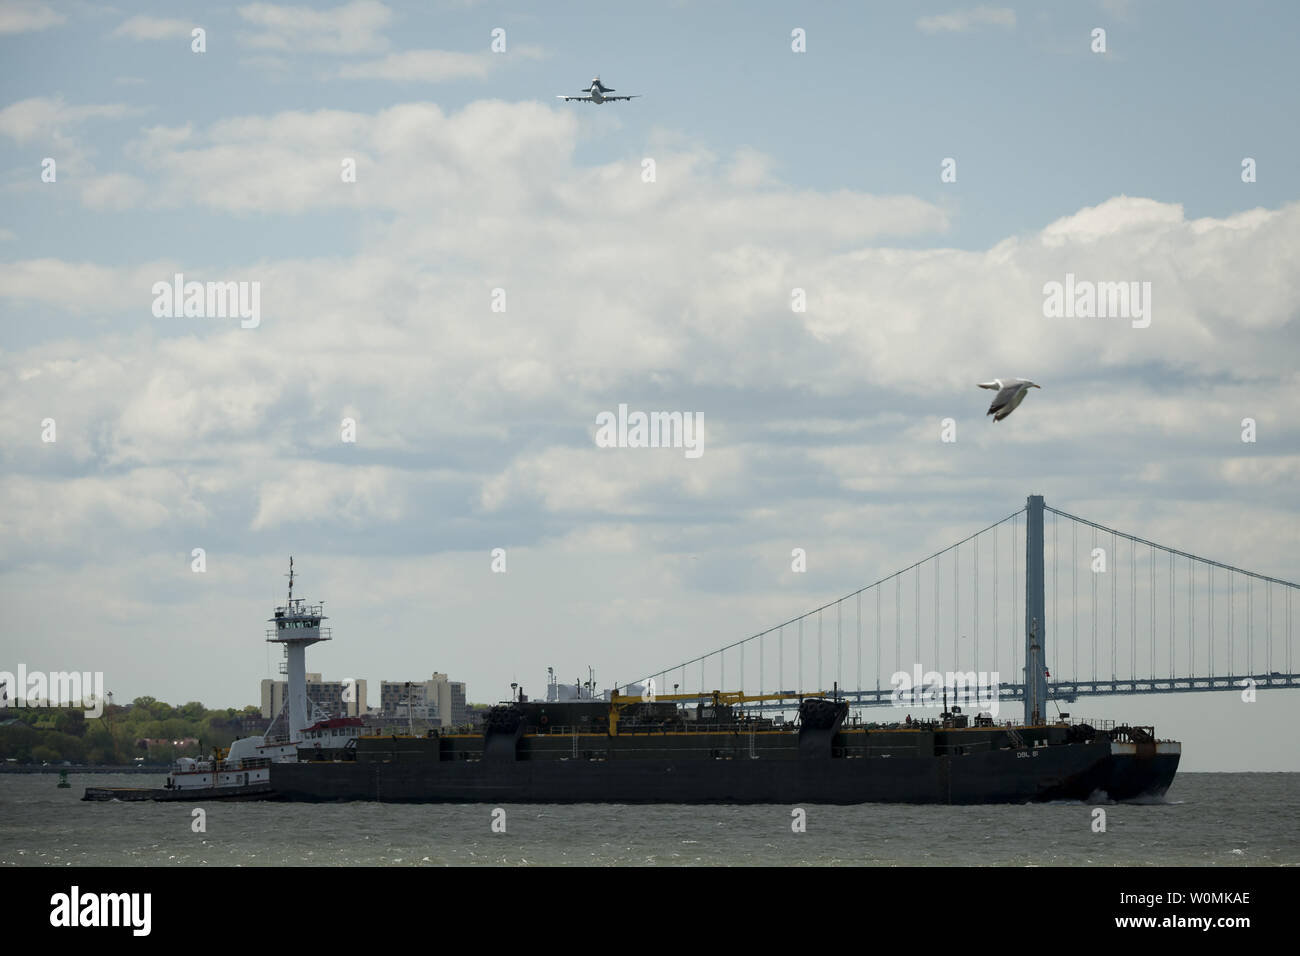 Space shuttle Enterprise, mounted atop a NASA 747 Shuttle Carrier Aircraft (SCA), is seen as it flies over the Verrazano Bridge, Friday, April 27, 2012, in New York. Enterprise was the first shuttle orbiter built for NASA performing test flights in the atmosphere and was incapable of spaceflight. Originally housed at the Smithsonian's Steven F. Udvar-Hazy Center, Enterprise will be demated from the SCA and placed on a barge that will eventually be moved by tugboat up the Hudson River to the Intrepid Sea, Air & Space Museum in June.    UPI/NASA/Bill Ingalls) Stock Photo